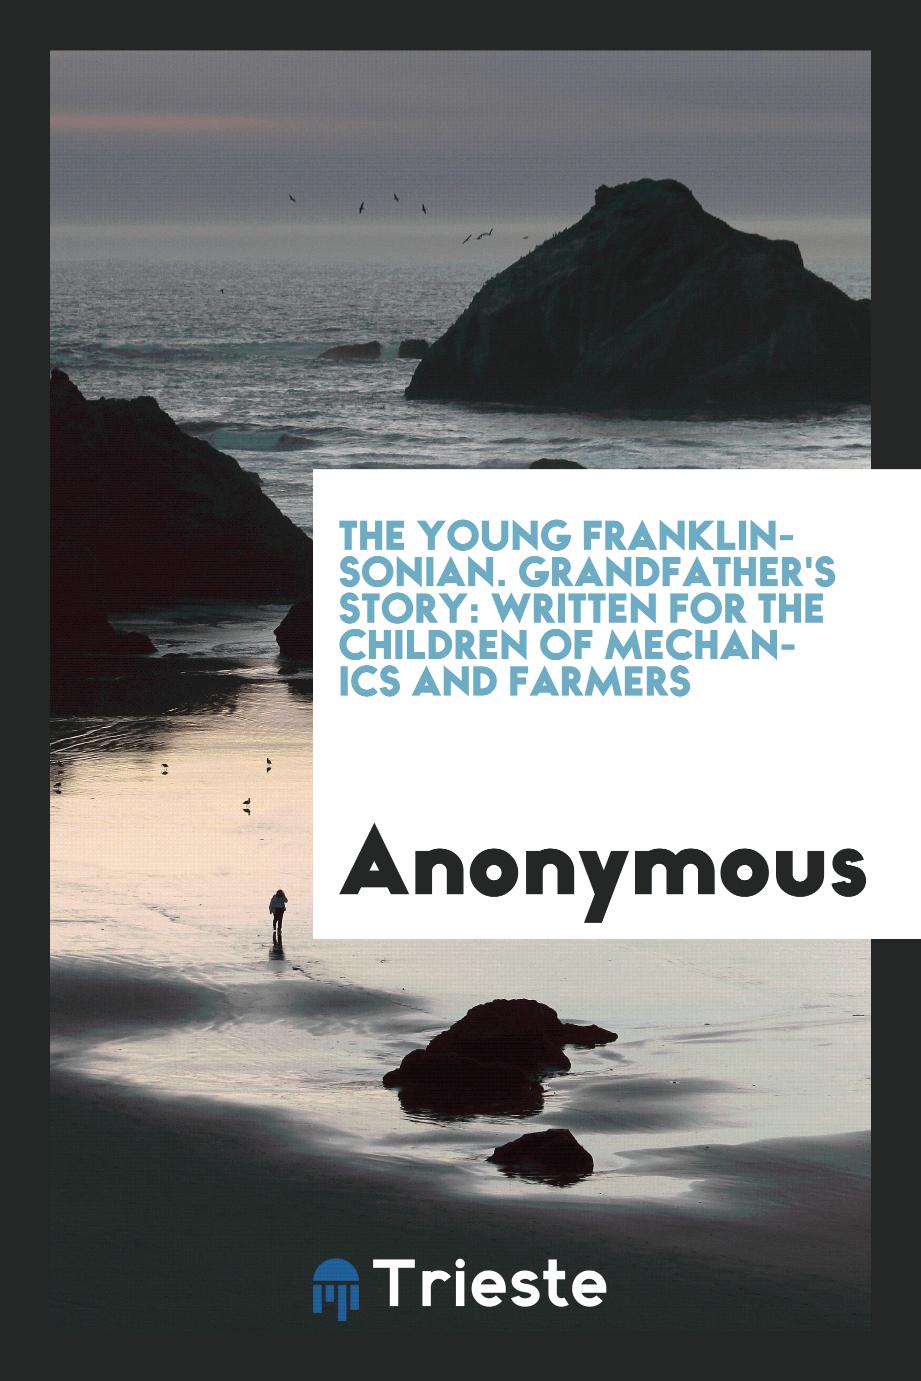 The Young Franklinsonian. Grandfather's Story: Written for the Children of Mechanics and Farmers